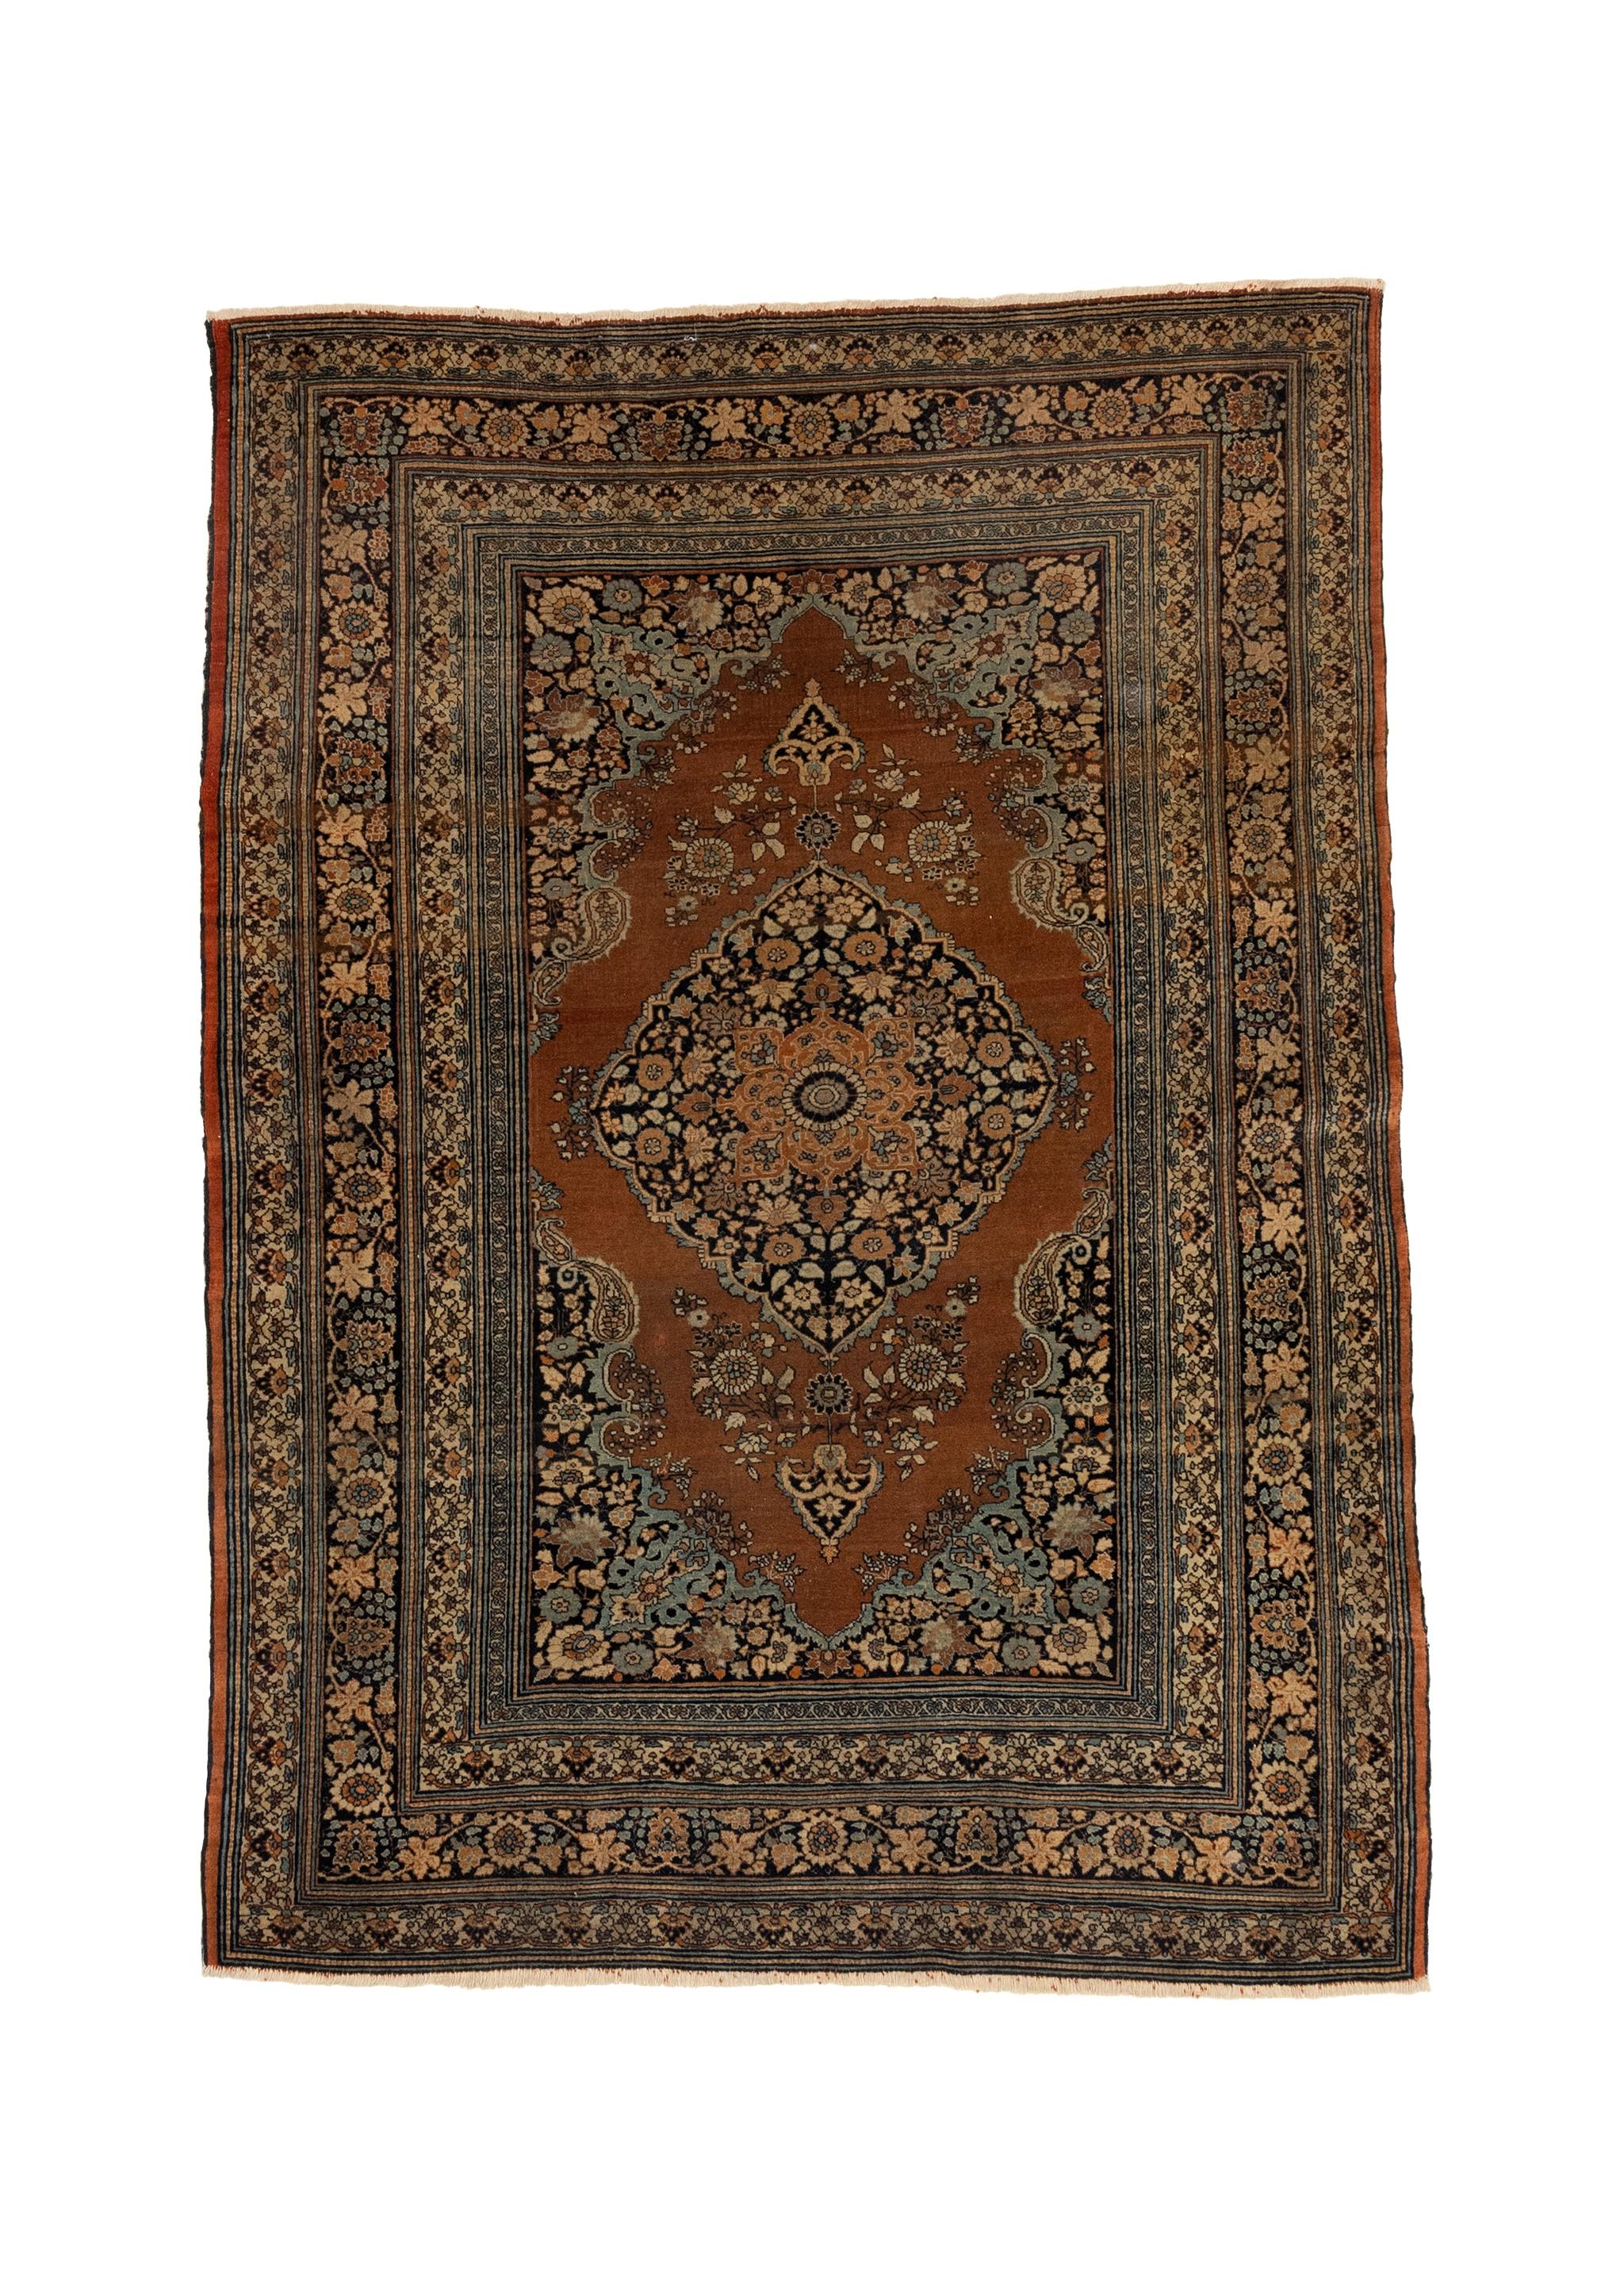 The Haji Jalili Tabriz rug is undeniably a work of art in Persian rug making. The intricate designs and lavish color palettes speak volumes about the unparalleled quality and scrupulous attention to detail that were put into each rug. Furthermore,